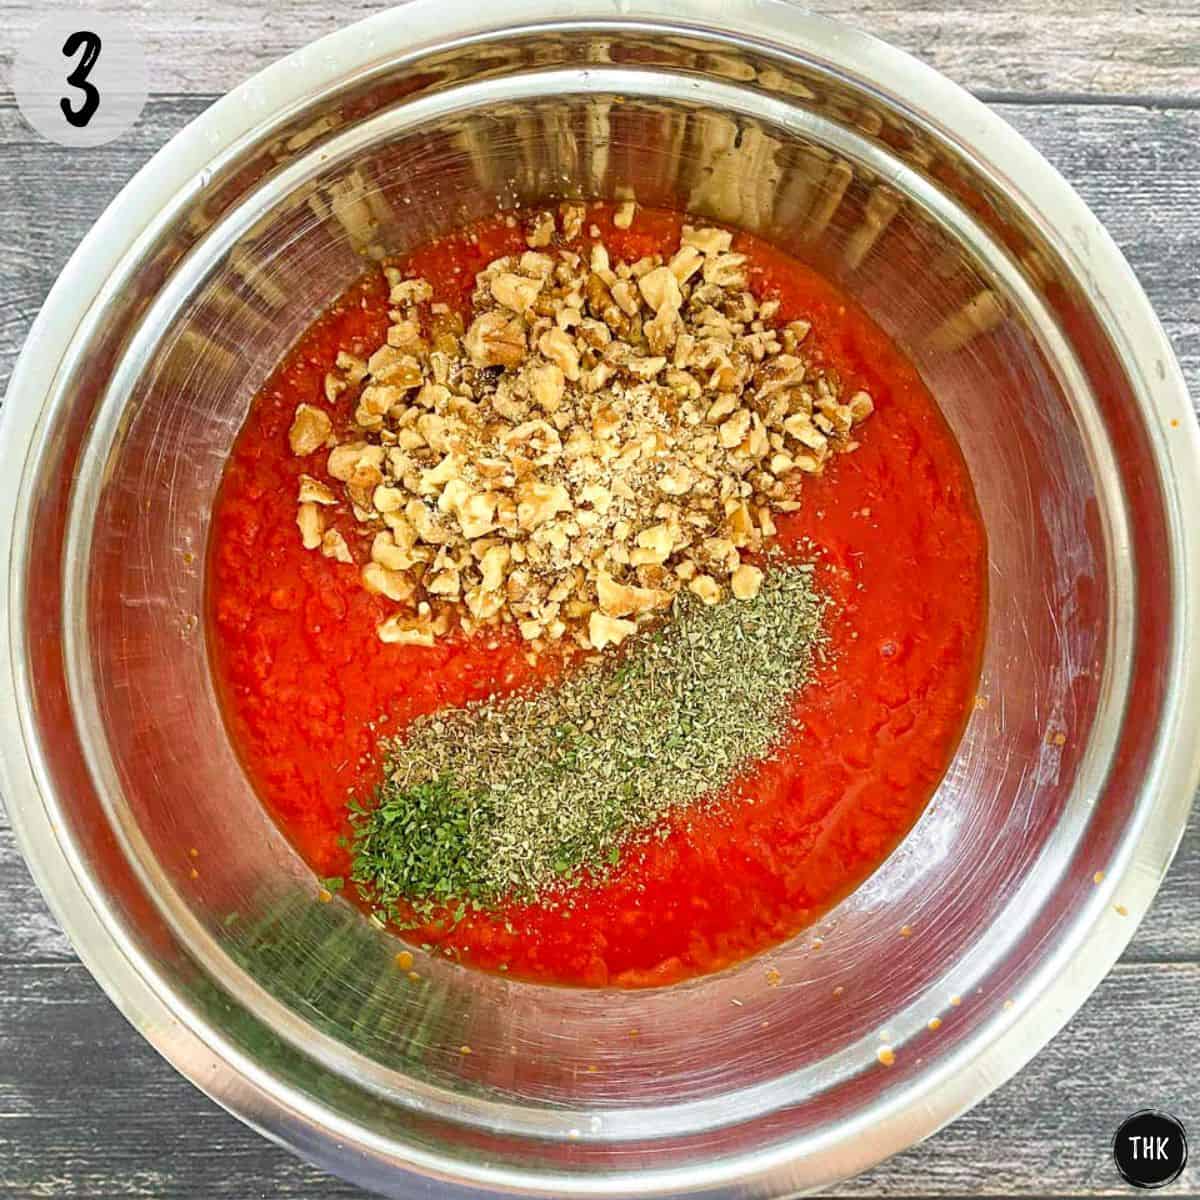 Tomato sauce with crushed walnuts and spices on top in mixing bowl.